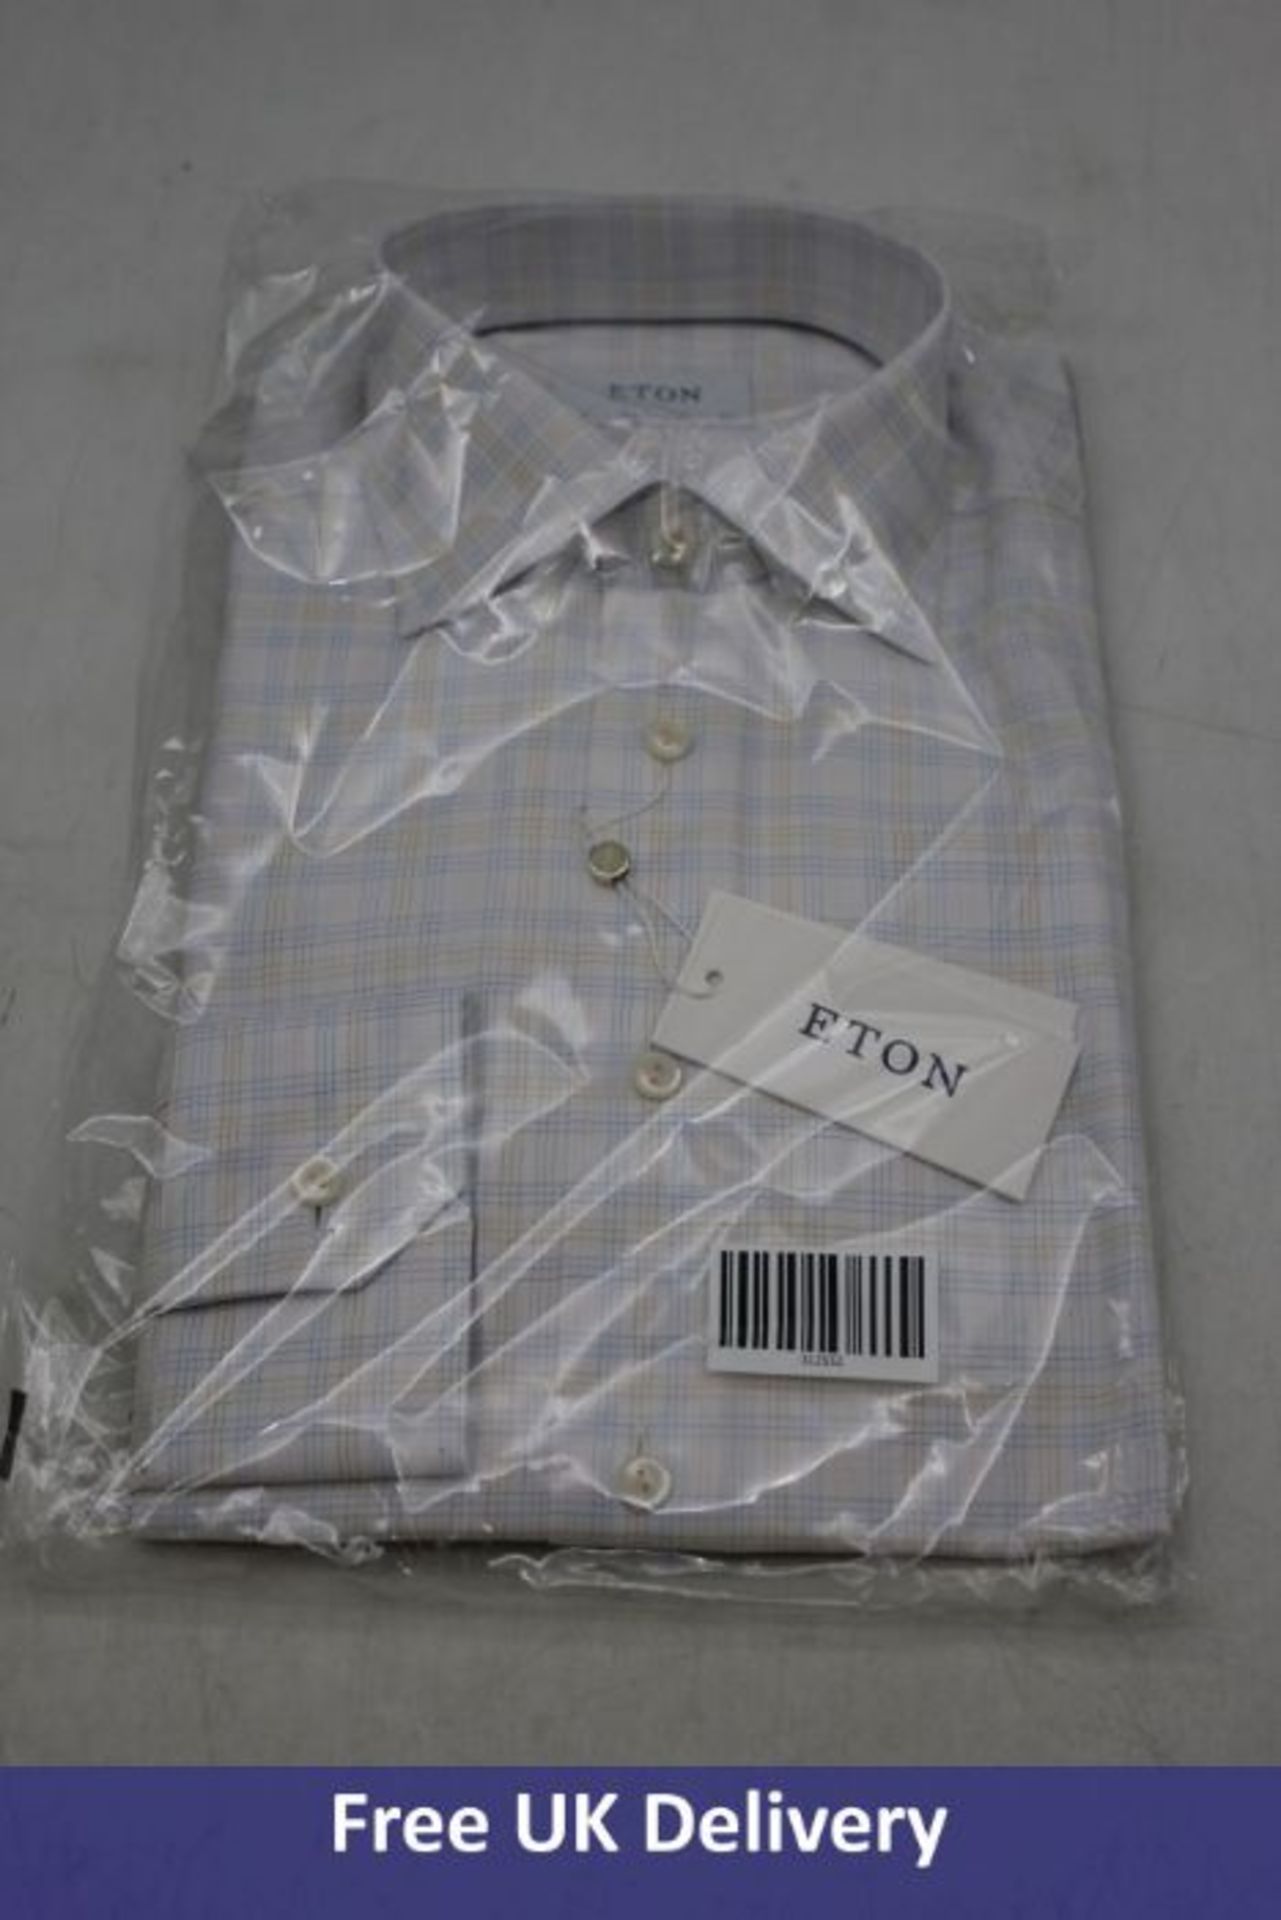 Two items of ETON Men's Clothing to include 1x Contemporary Checked Shirt, Blue/Tan, Size EU 39/15.5